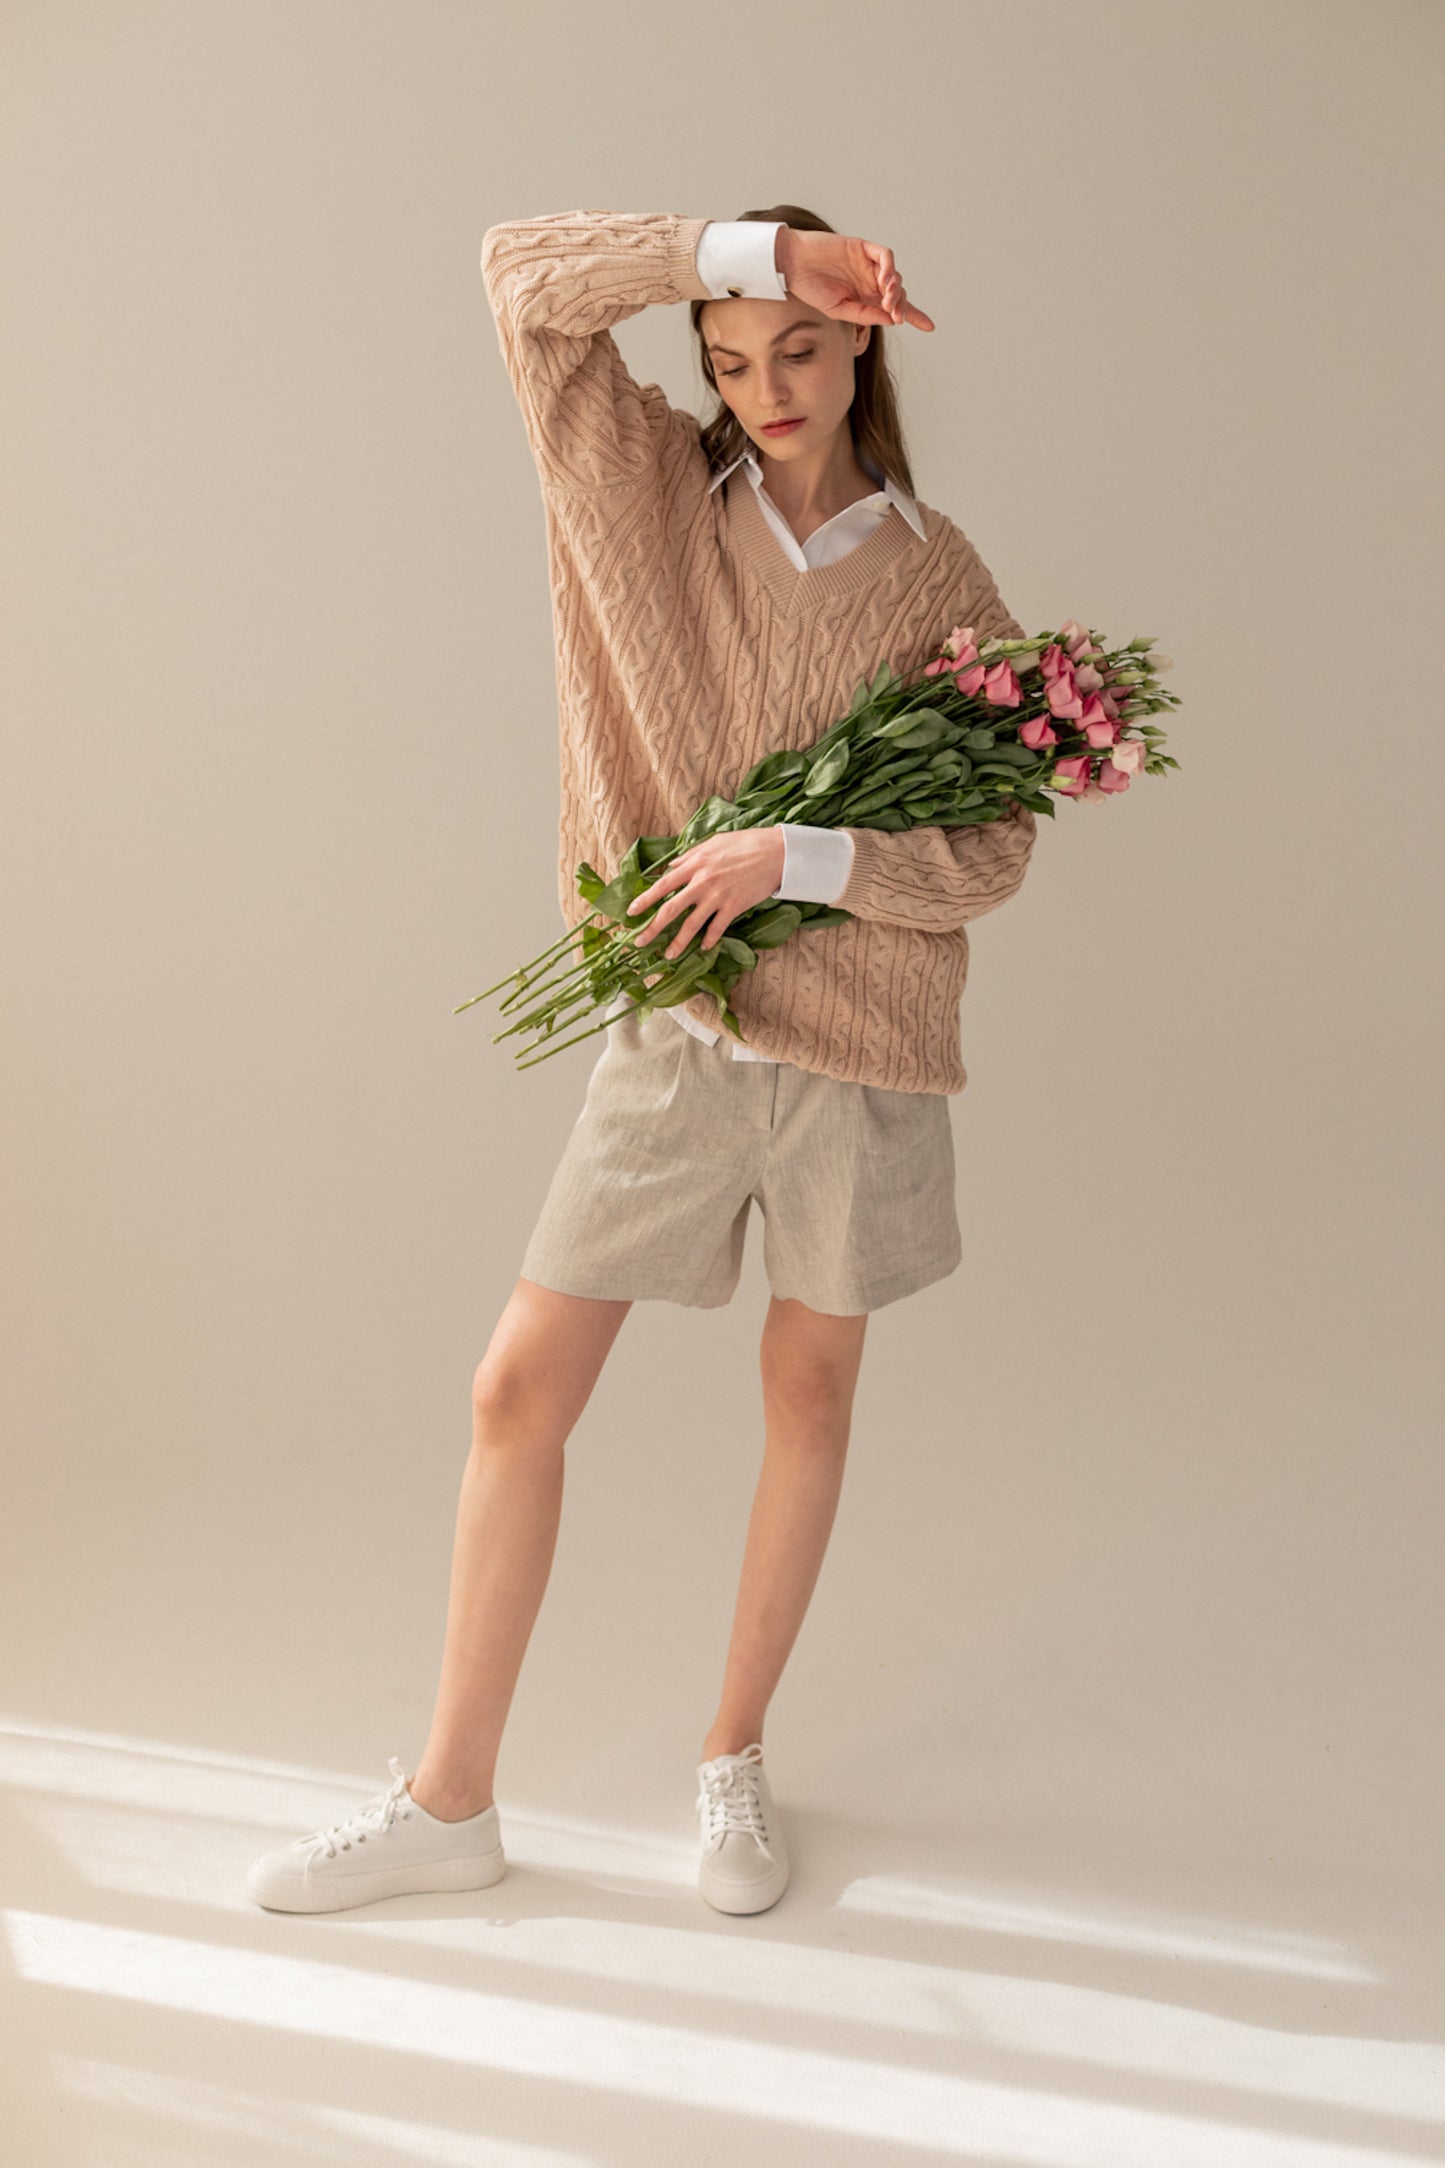 Provence Sweater - Beige